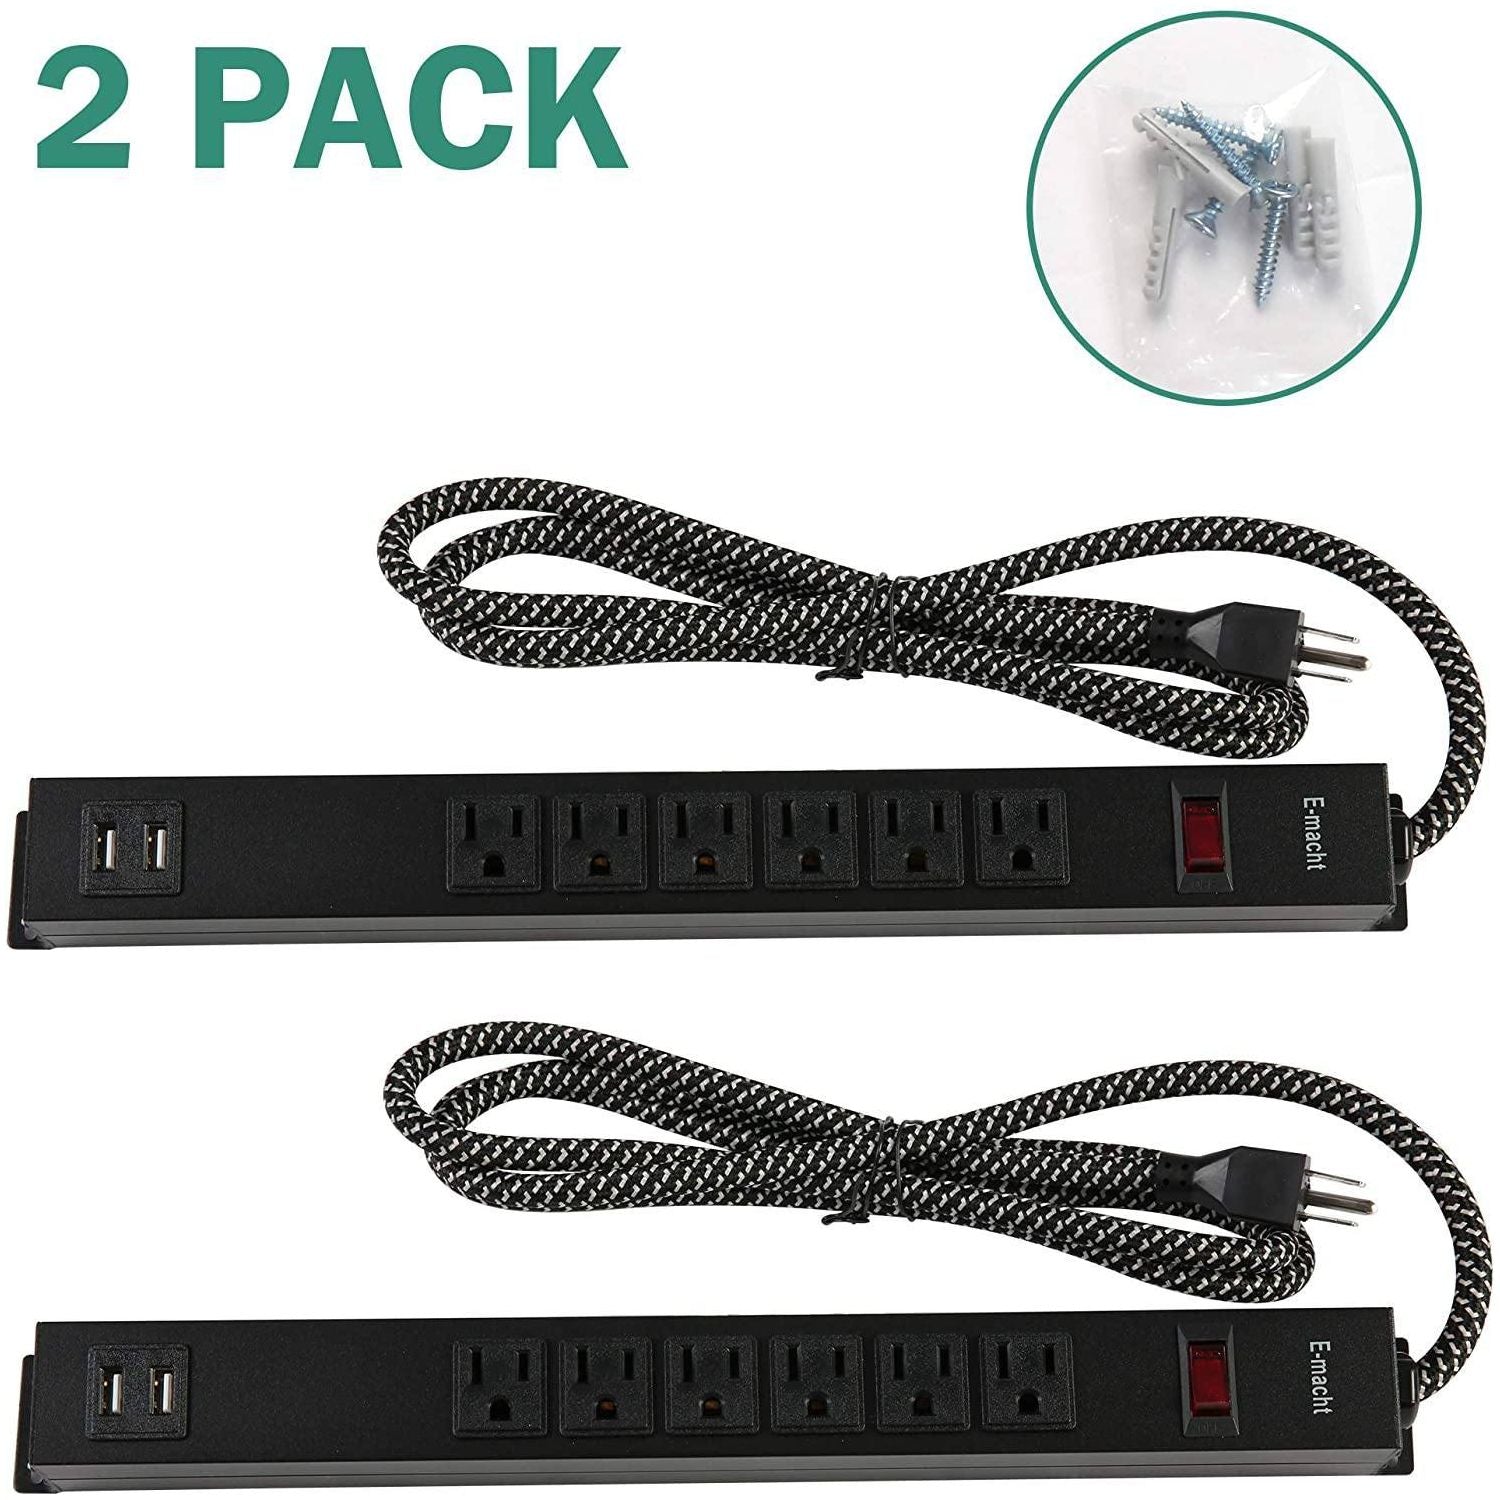 2 Pack Long Power Strip Surge Protector, 6 Metal Power Outlets 2 USB Ports, 6 ft Long Extension Cord Moorescarts